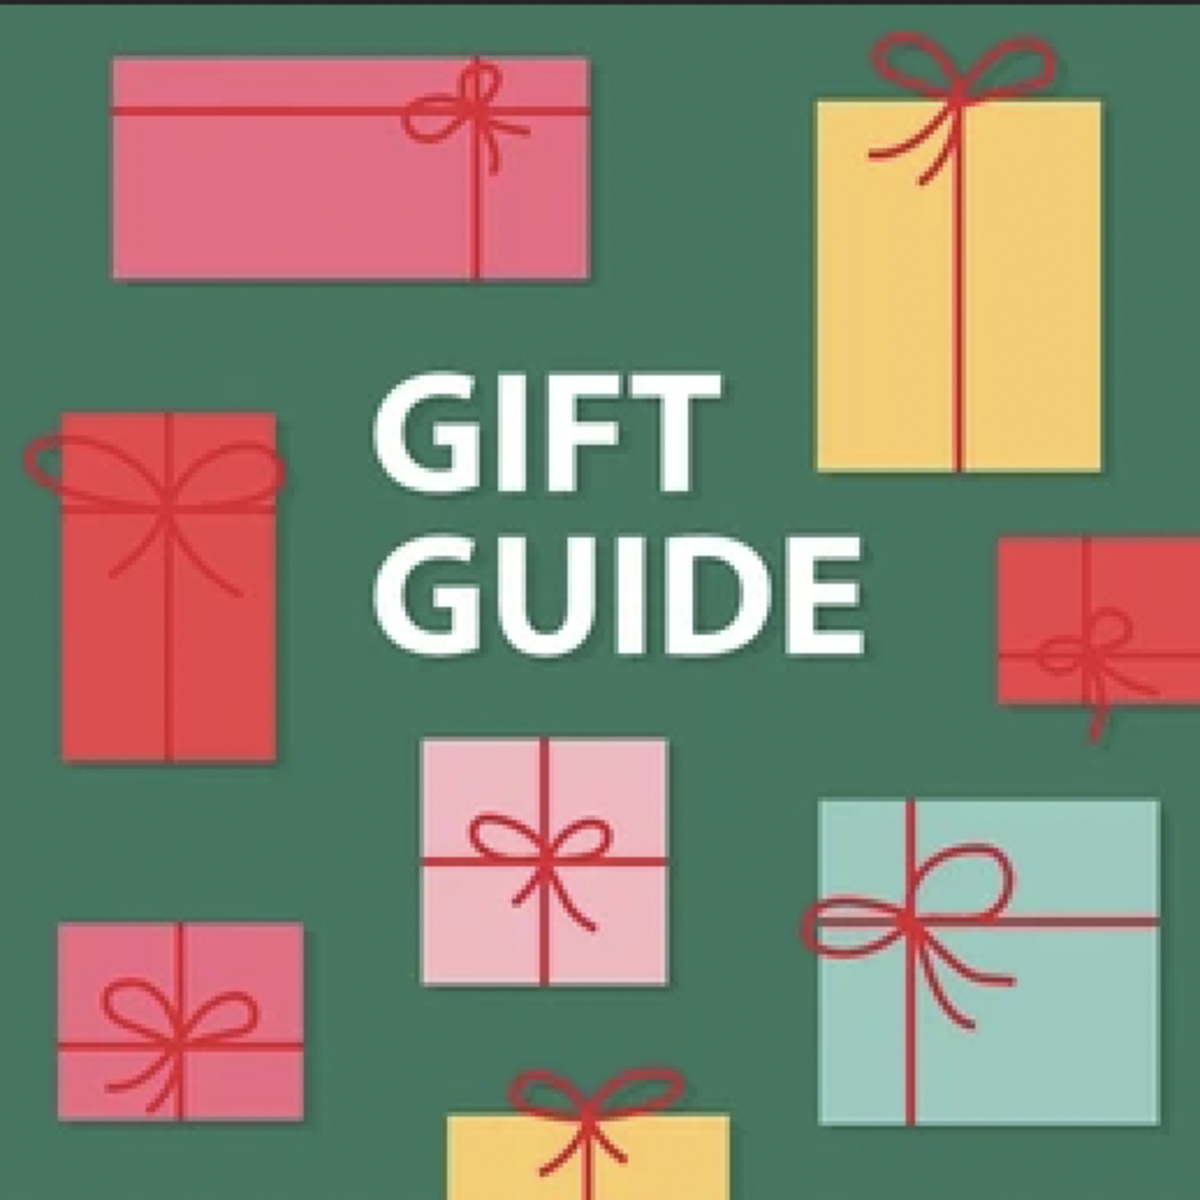 birthday gift: Birthday Gift Guide: Gifting made easy with birthday gift  ideas for all - The Economic Times